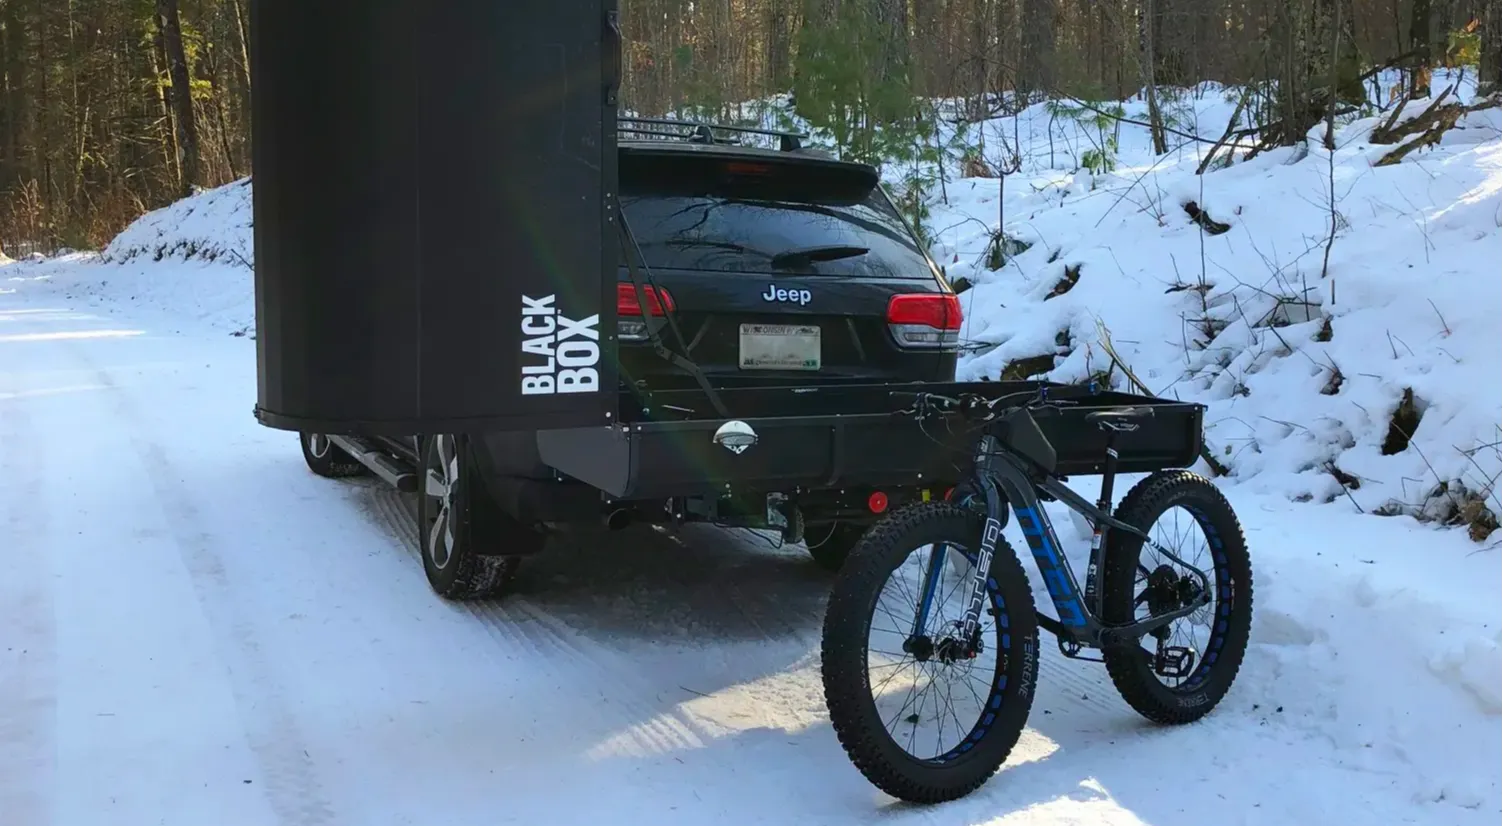 BlackBox Cargo Carrier with Downhill bikes in snow